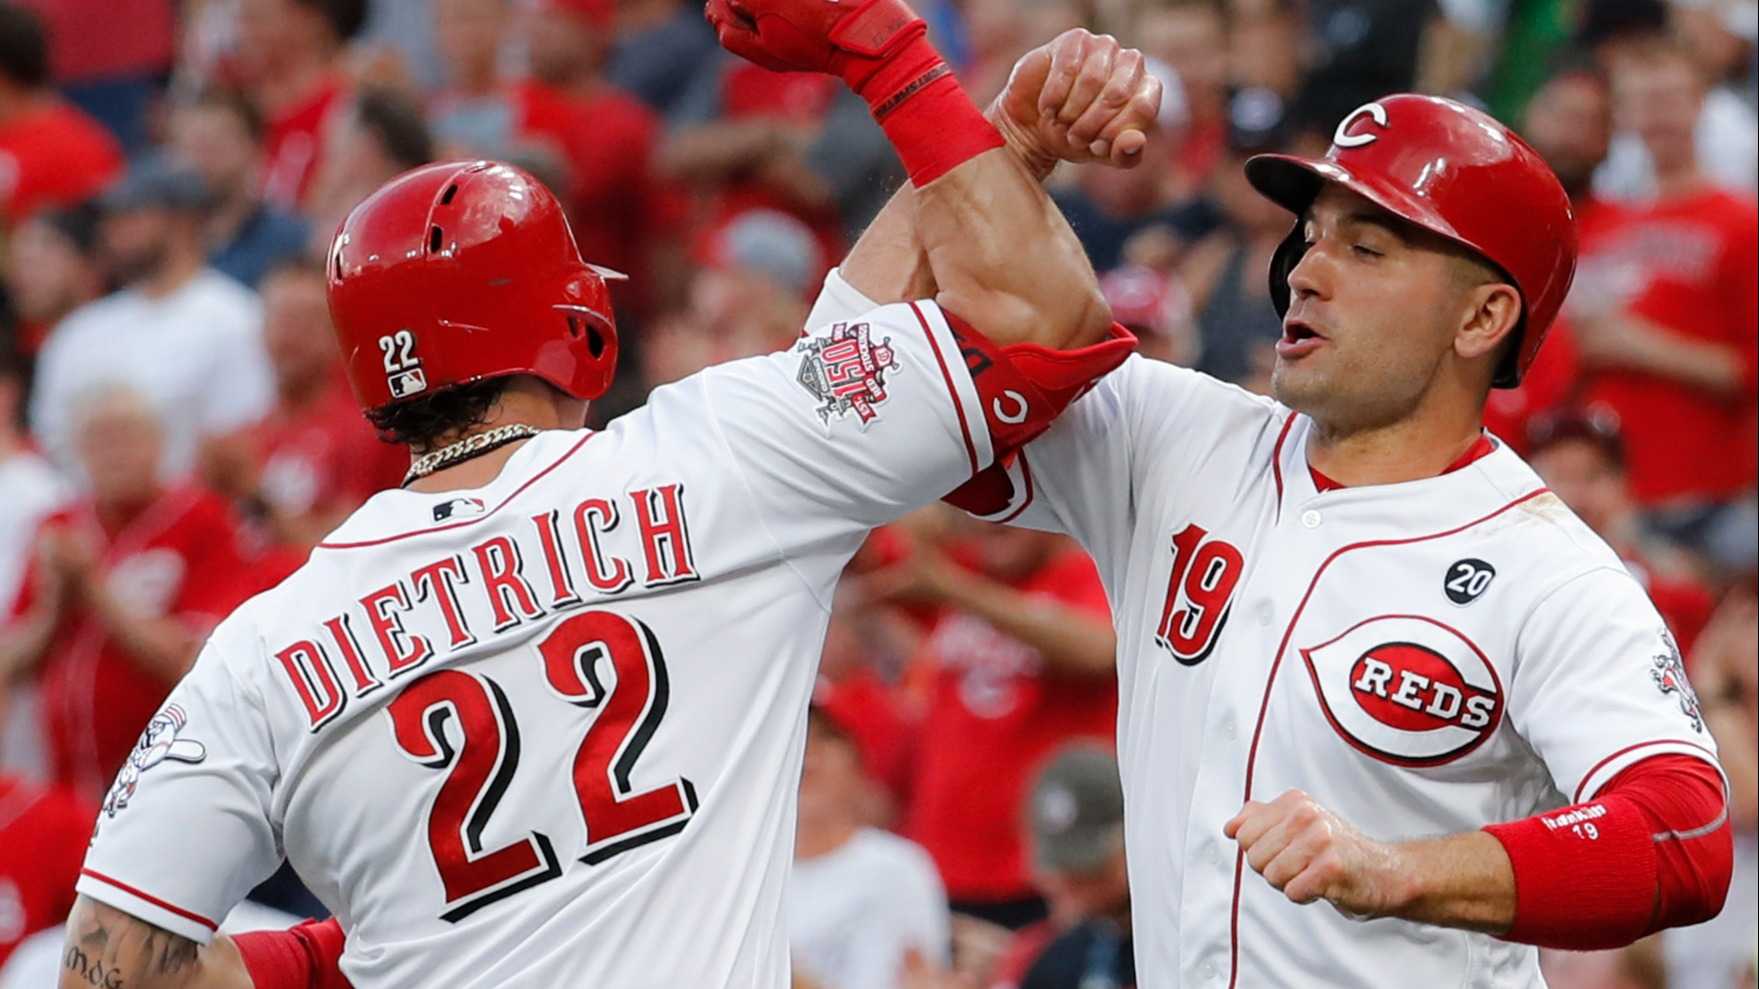  Reds Looking to be Dangerous in Start of New Decade